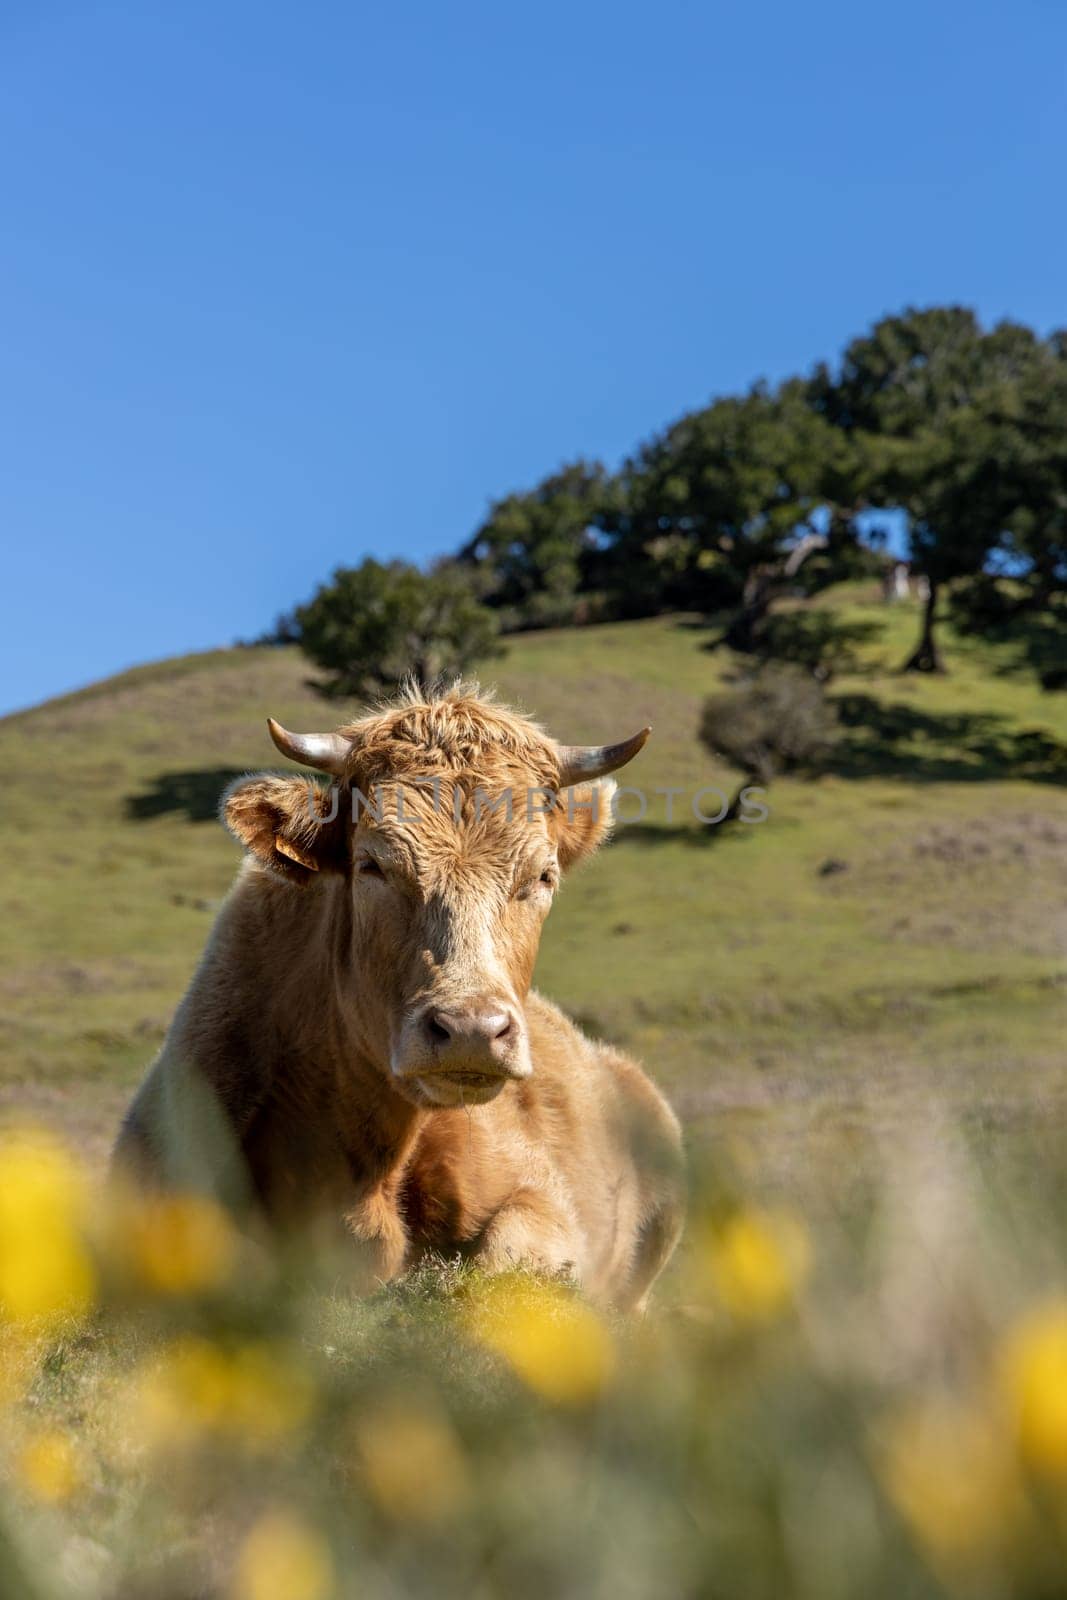 A bull in a lush, green meadow, with tall grasses swaying in the breeze